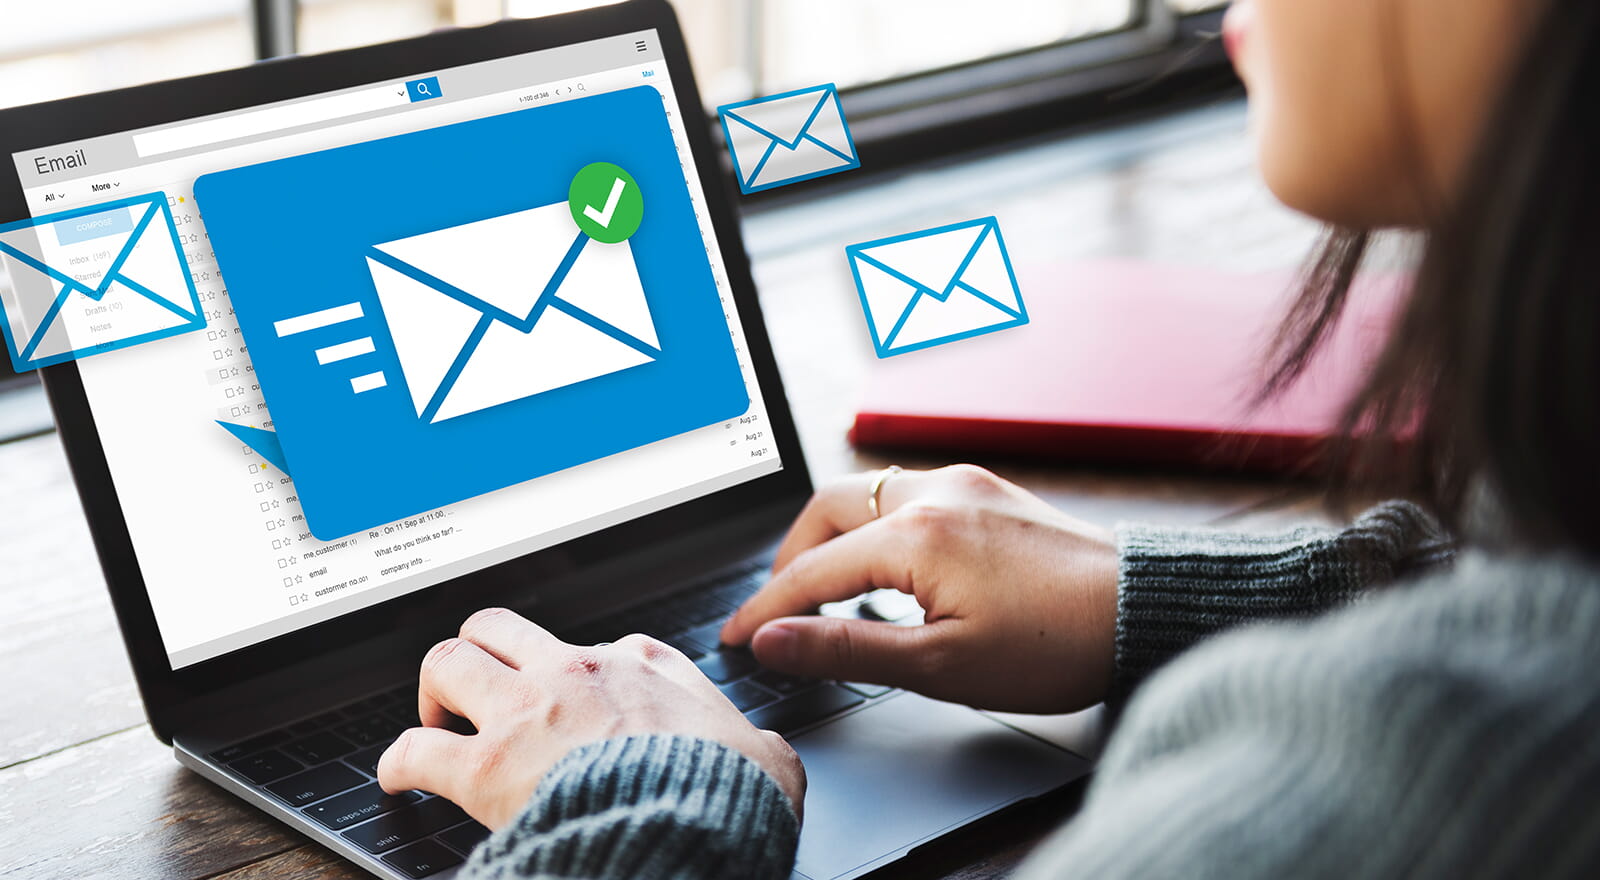 set autoresponders on your email